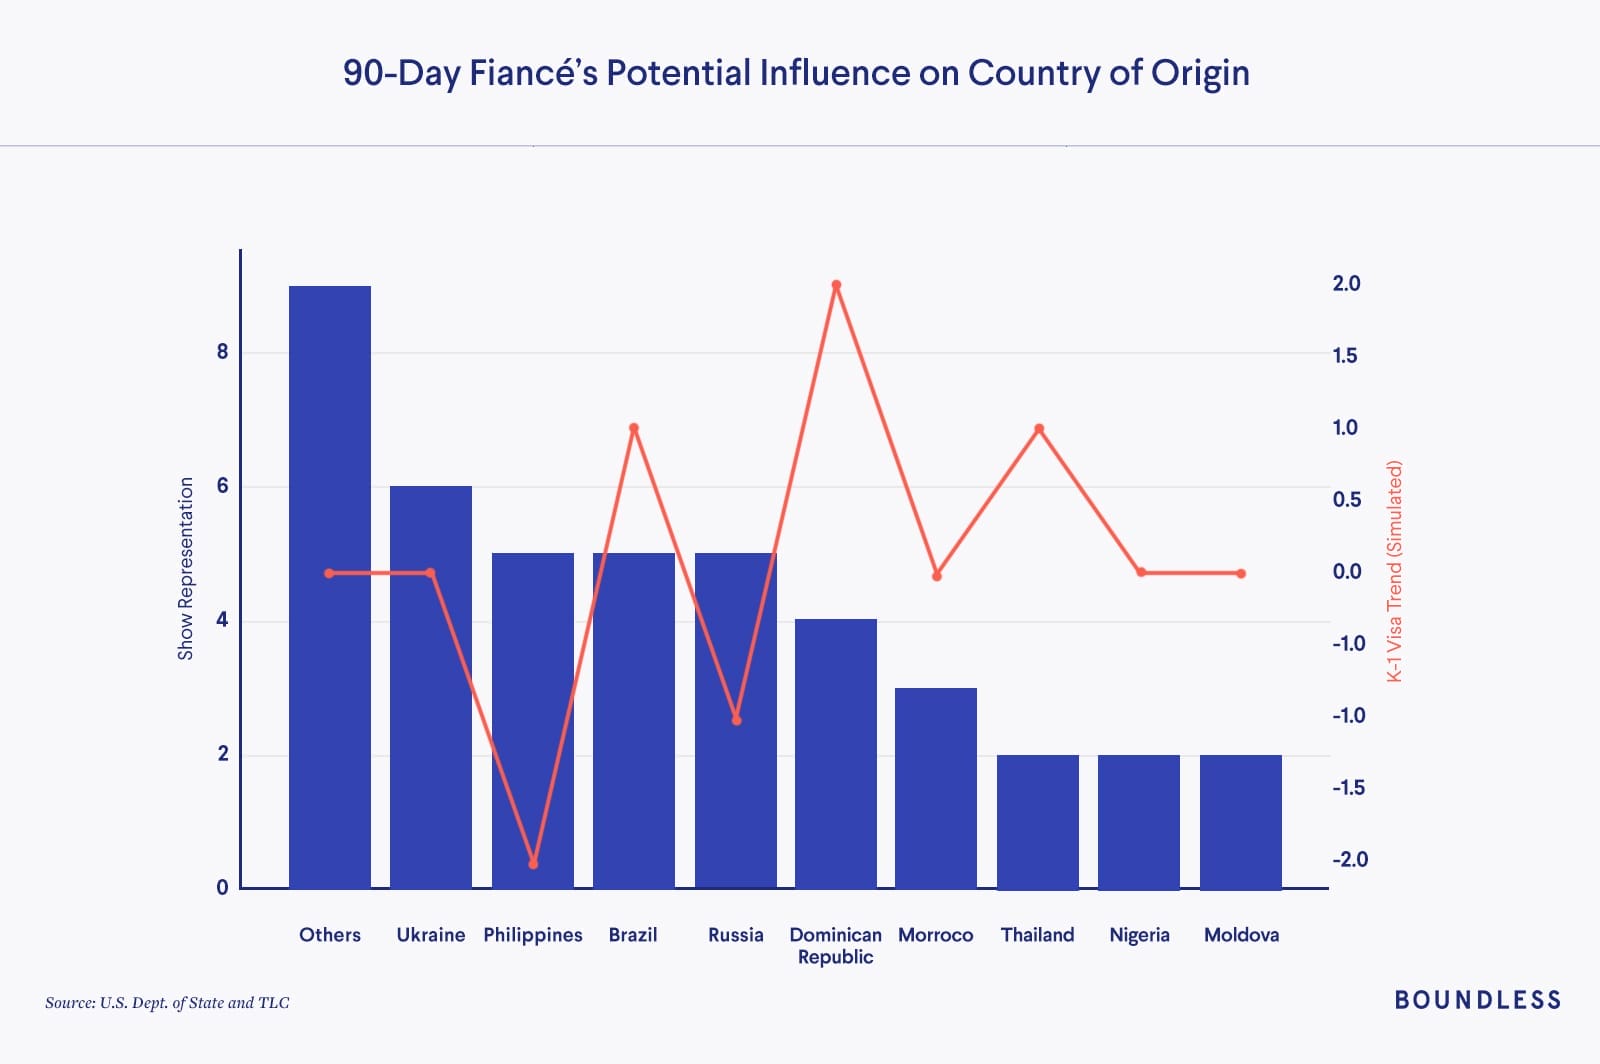 A graph showing 90-Day Fiance's Potential Influence on Country of Origin